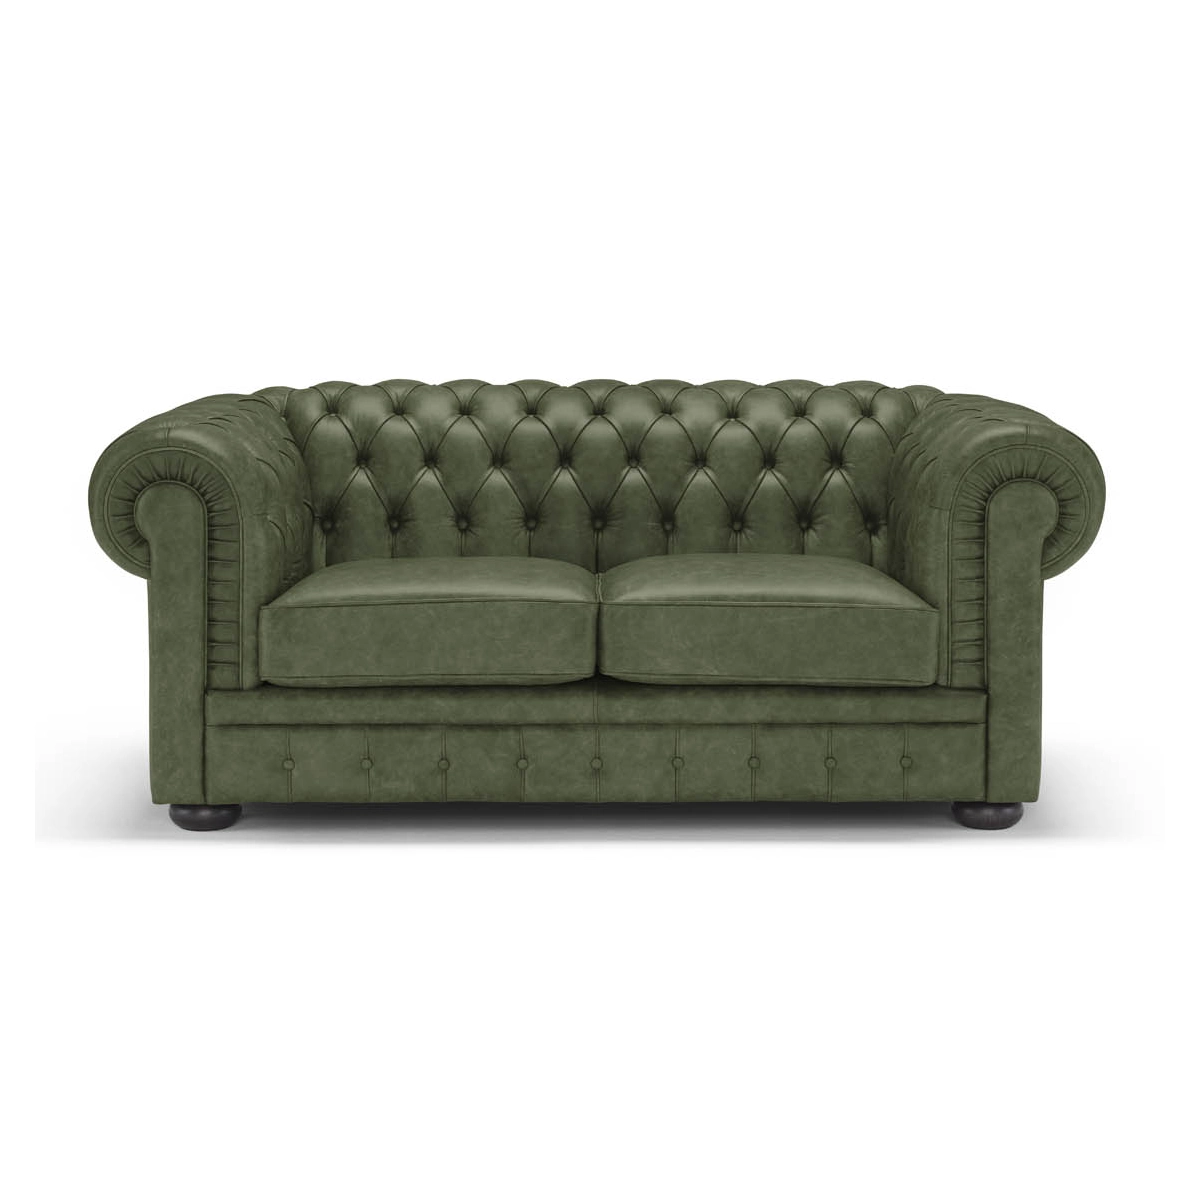 Two-seater leather Chesterfield sofa